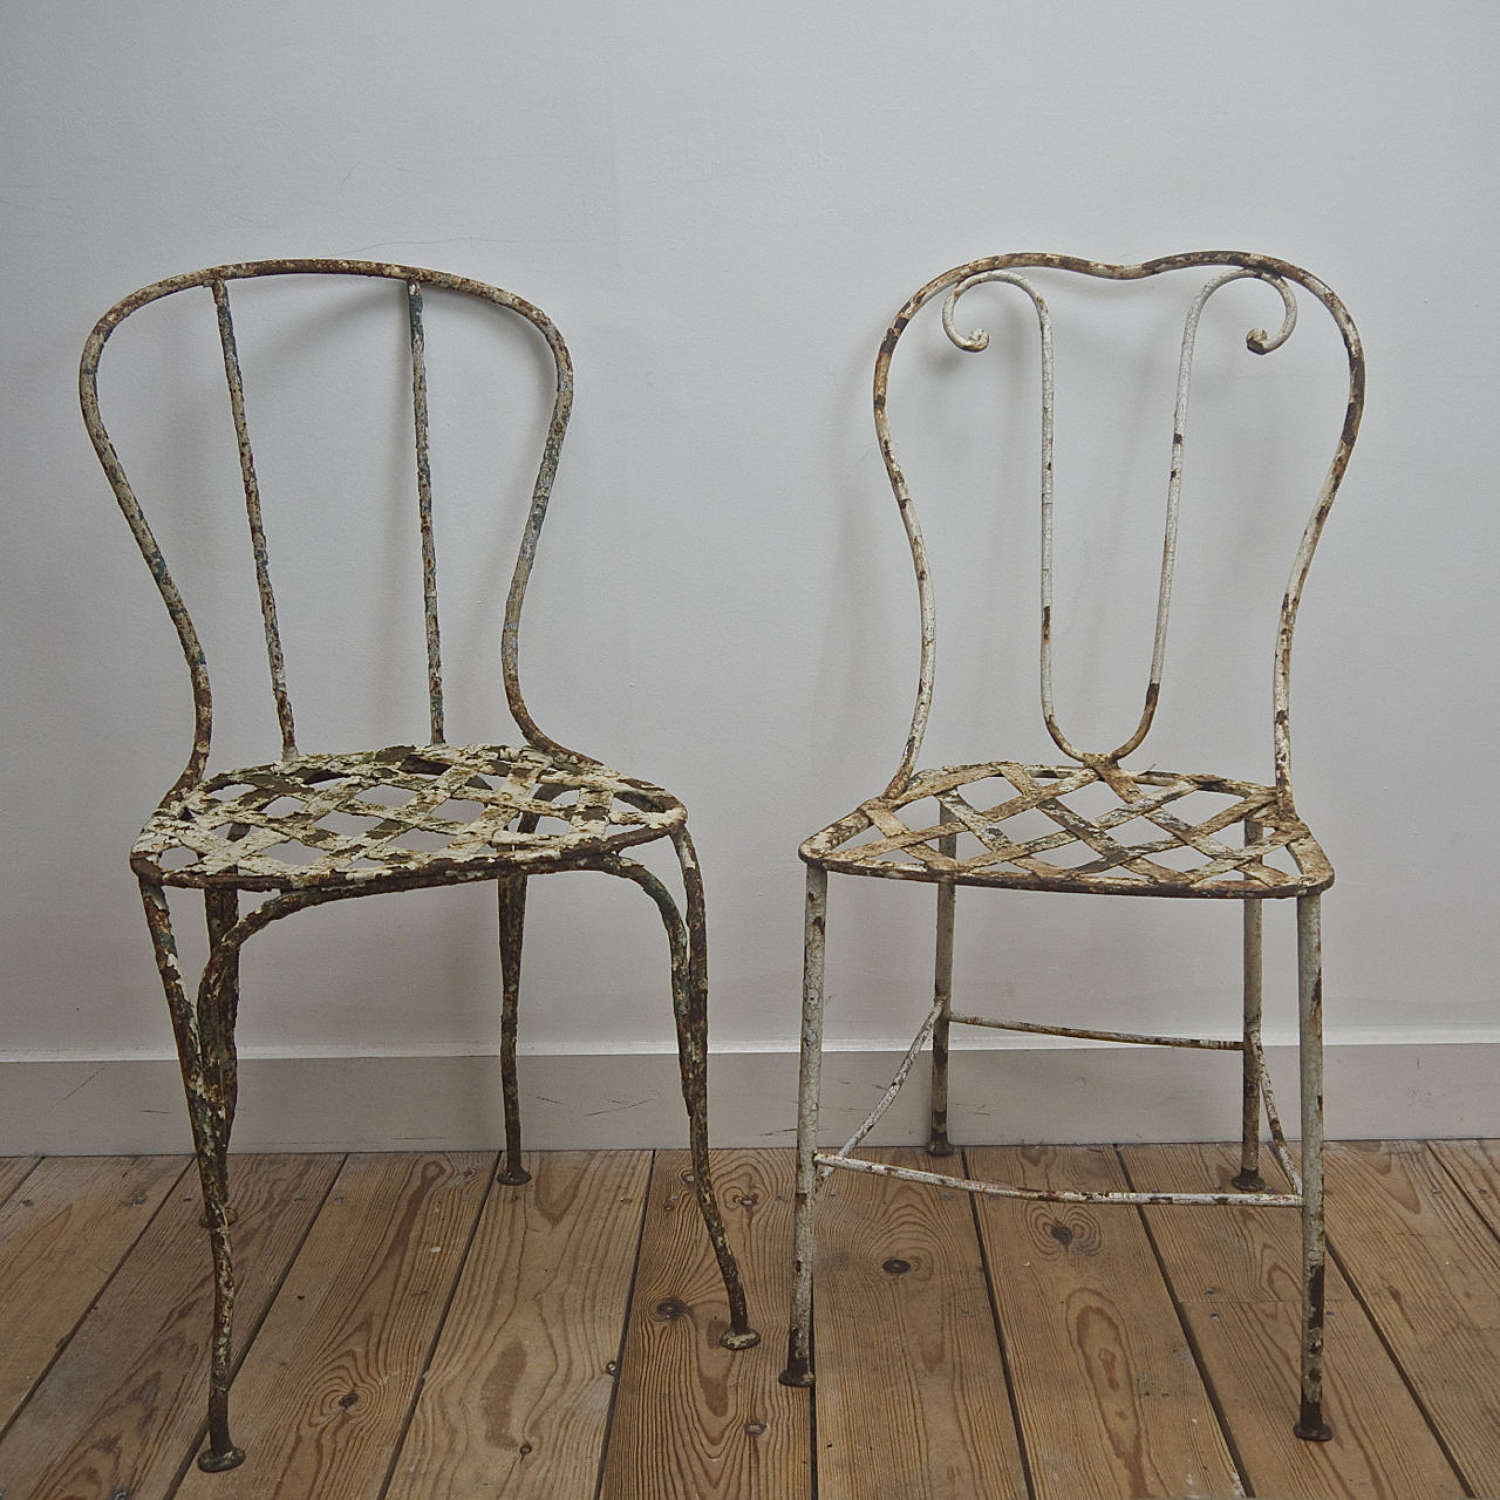 Pair of Garden Chairs French 19th Century